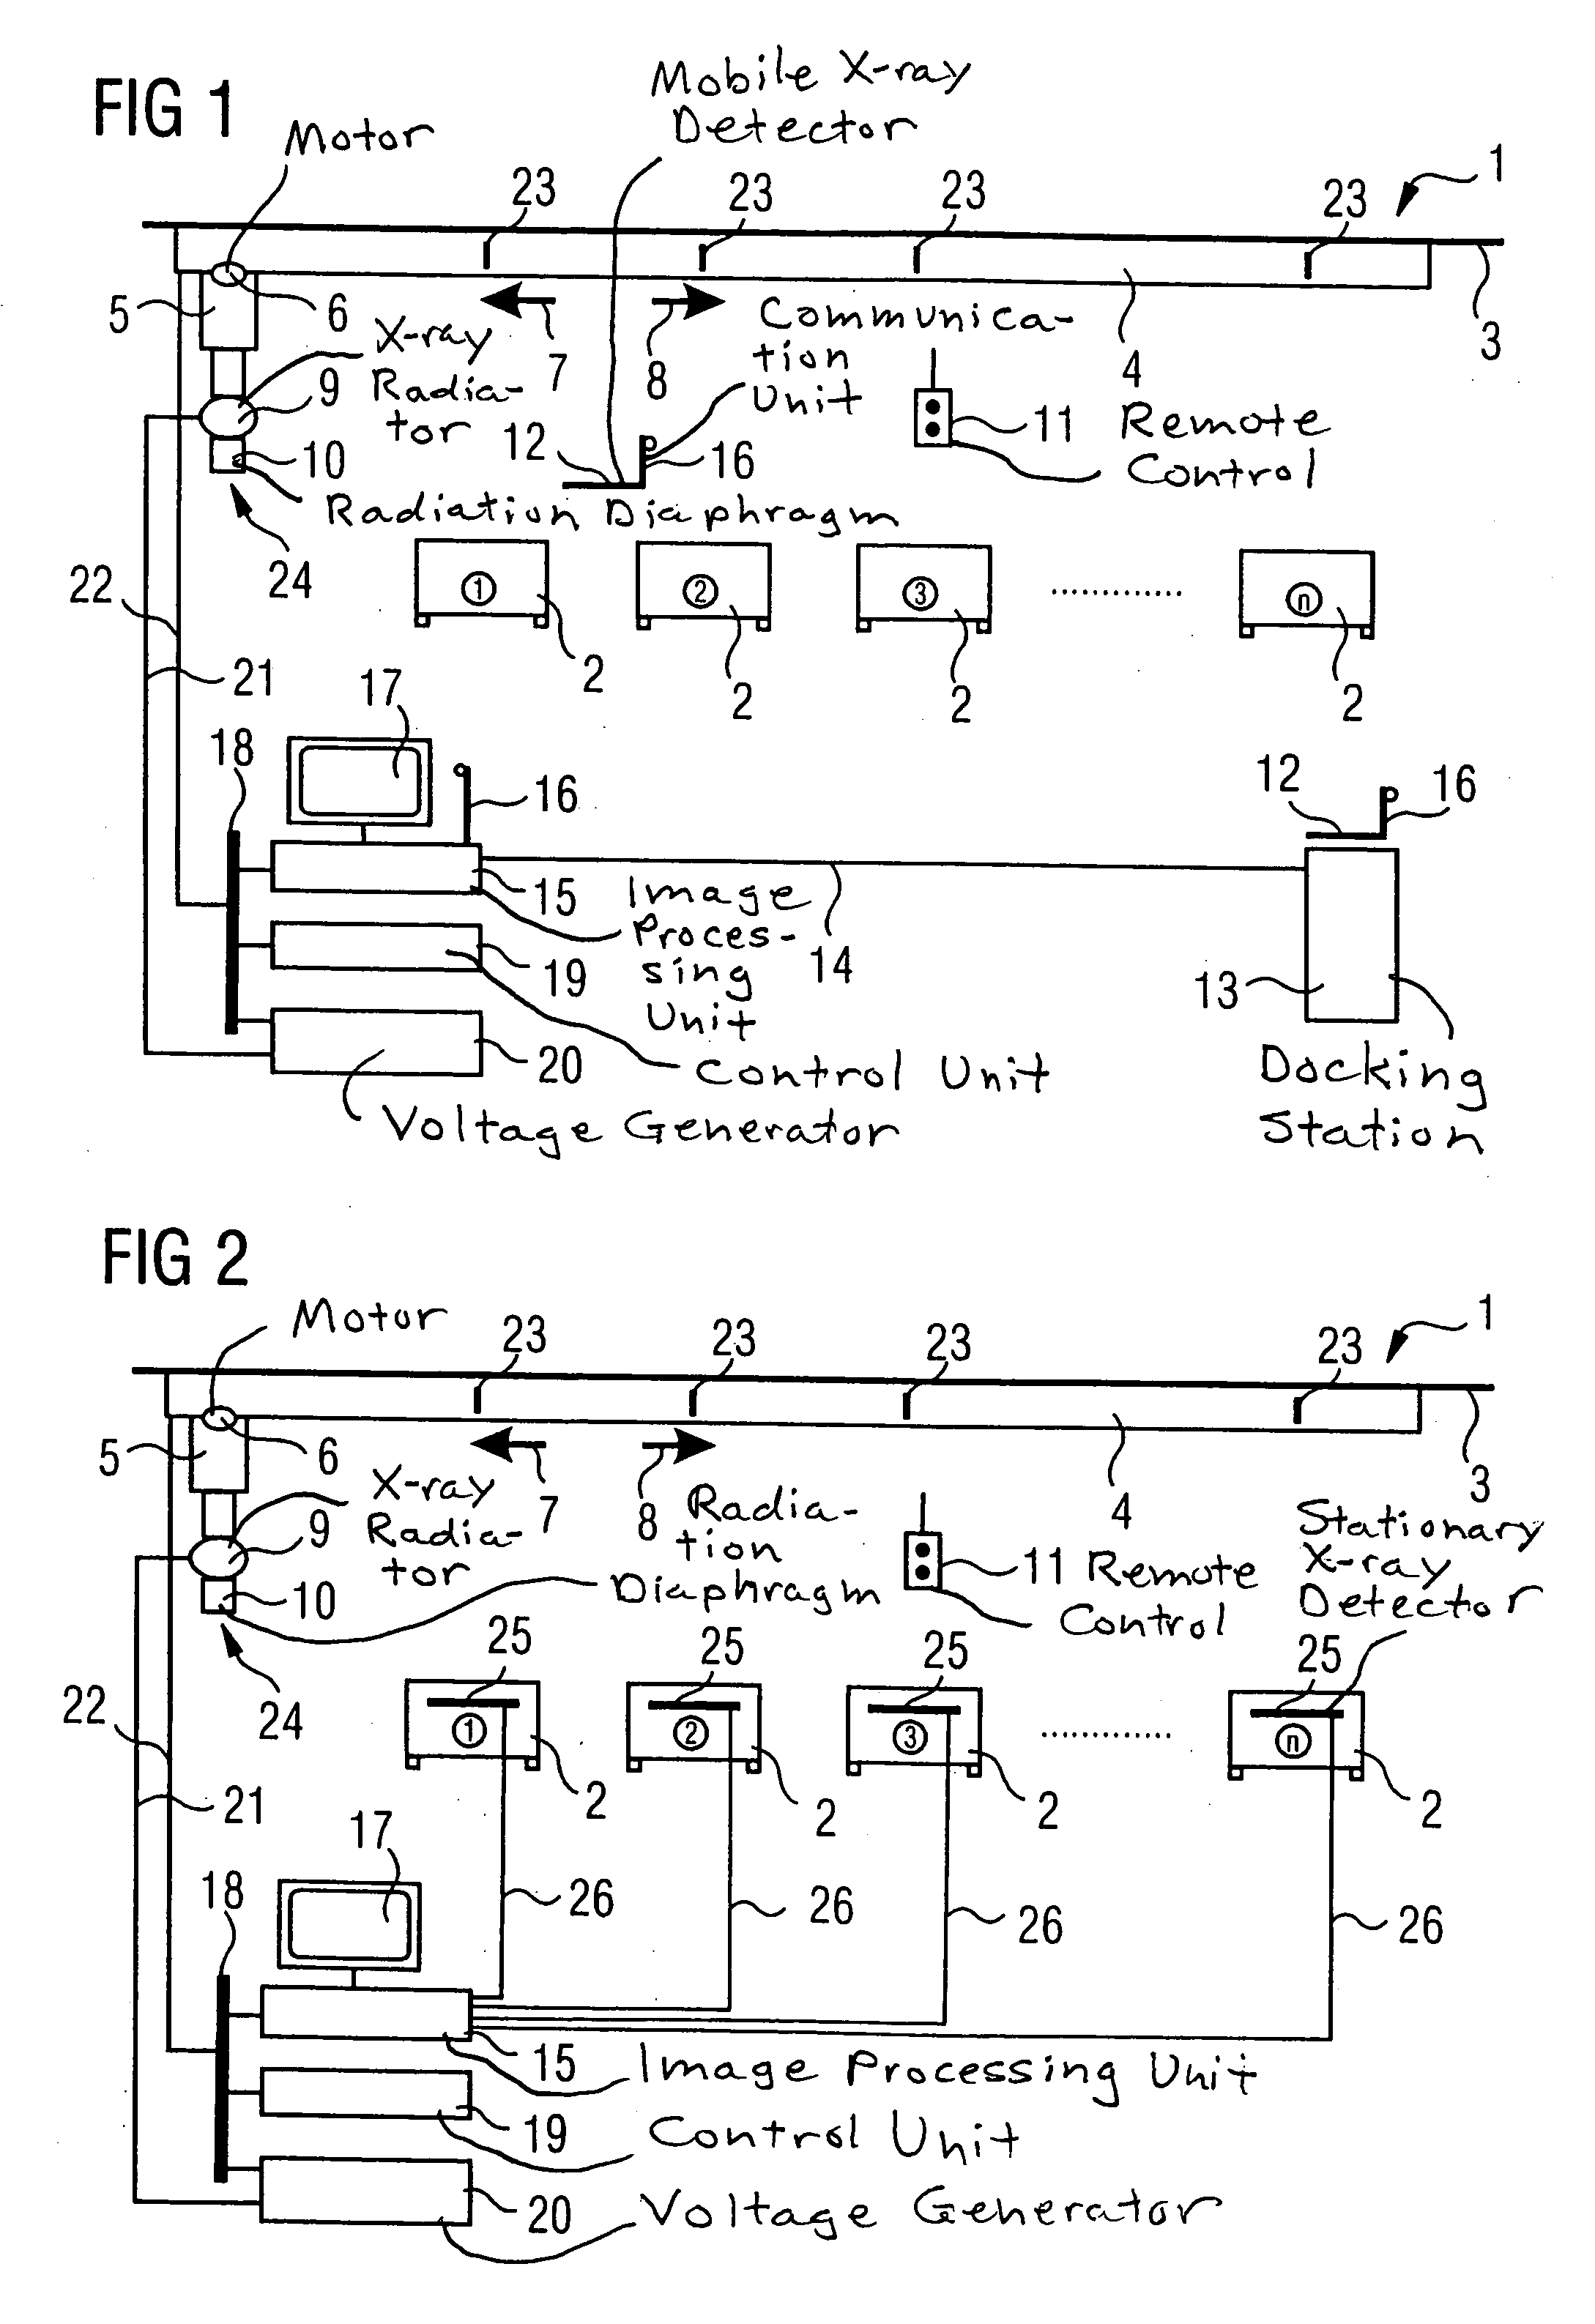 Apparatus and method for conducting medical procedures on multiple patients respectively at different locations